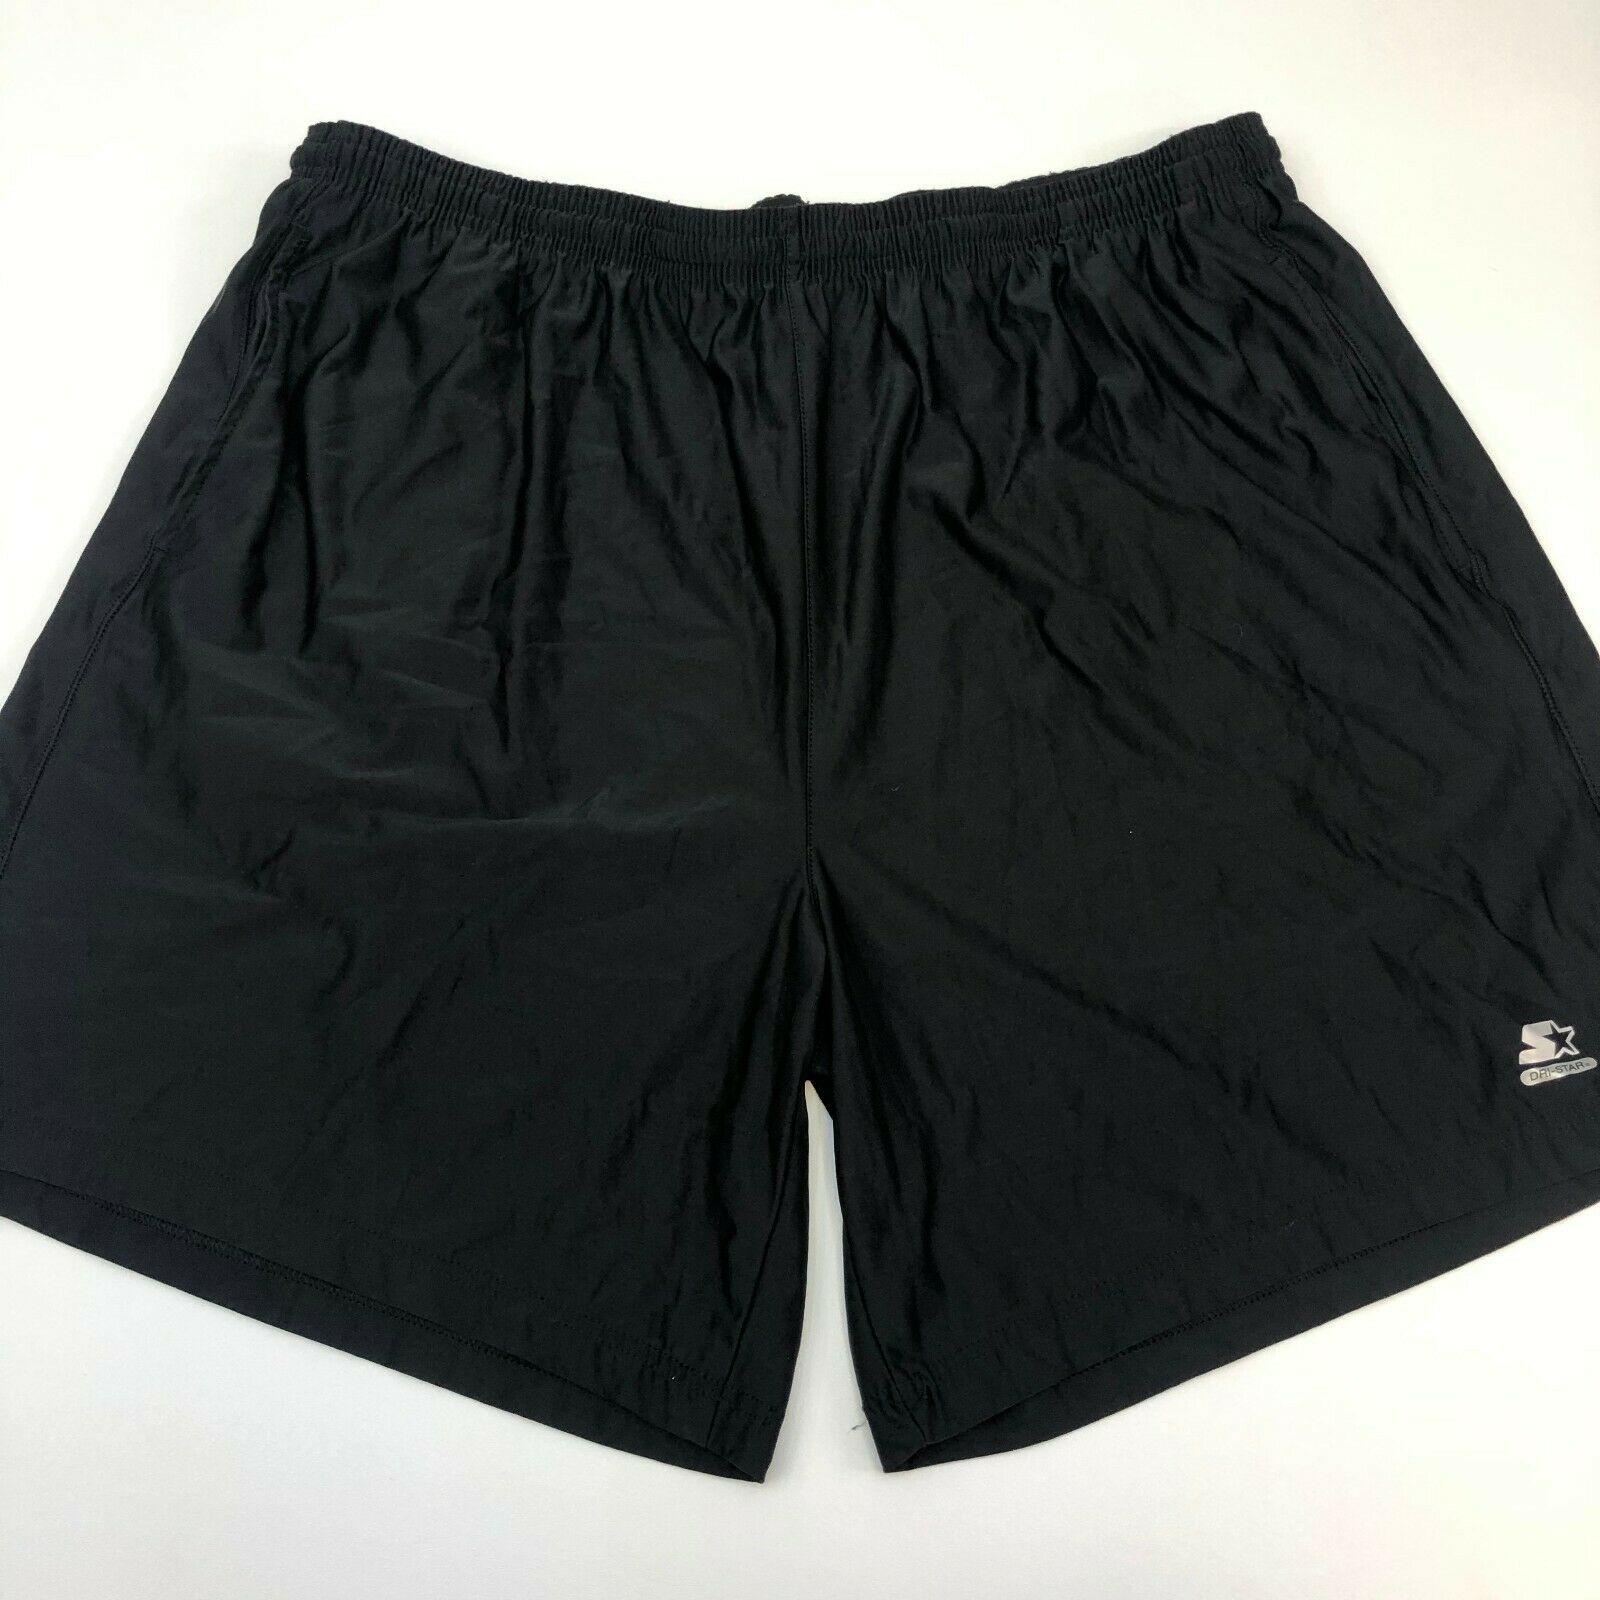 Starter Athletic Shorts Mens XXL Black Polyester Casual Workout - Shorts